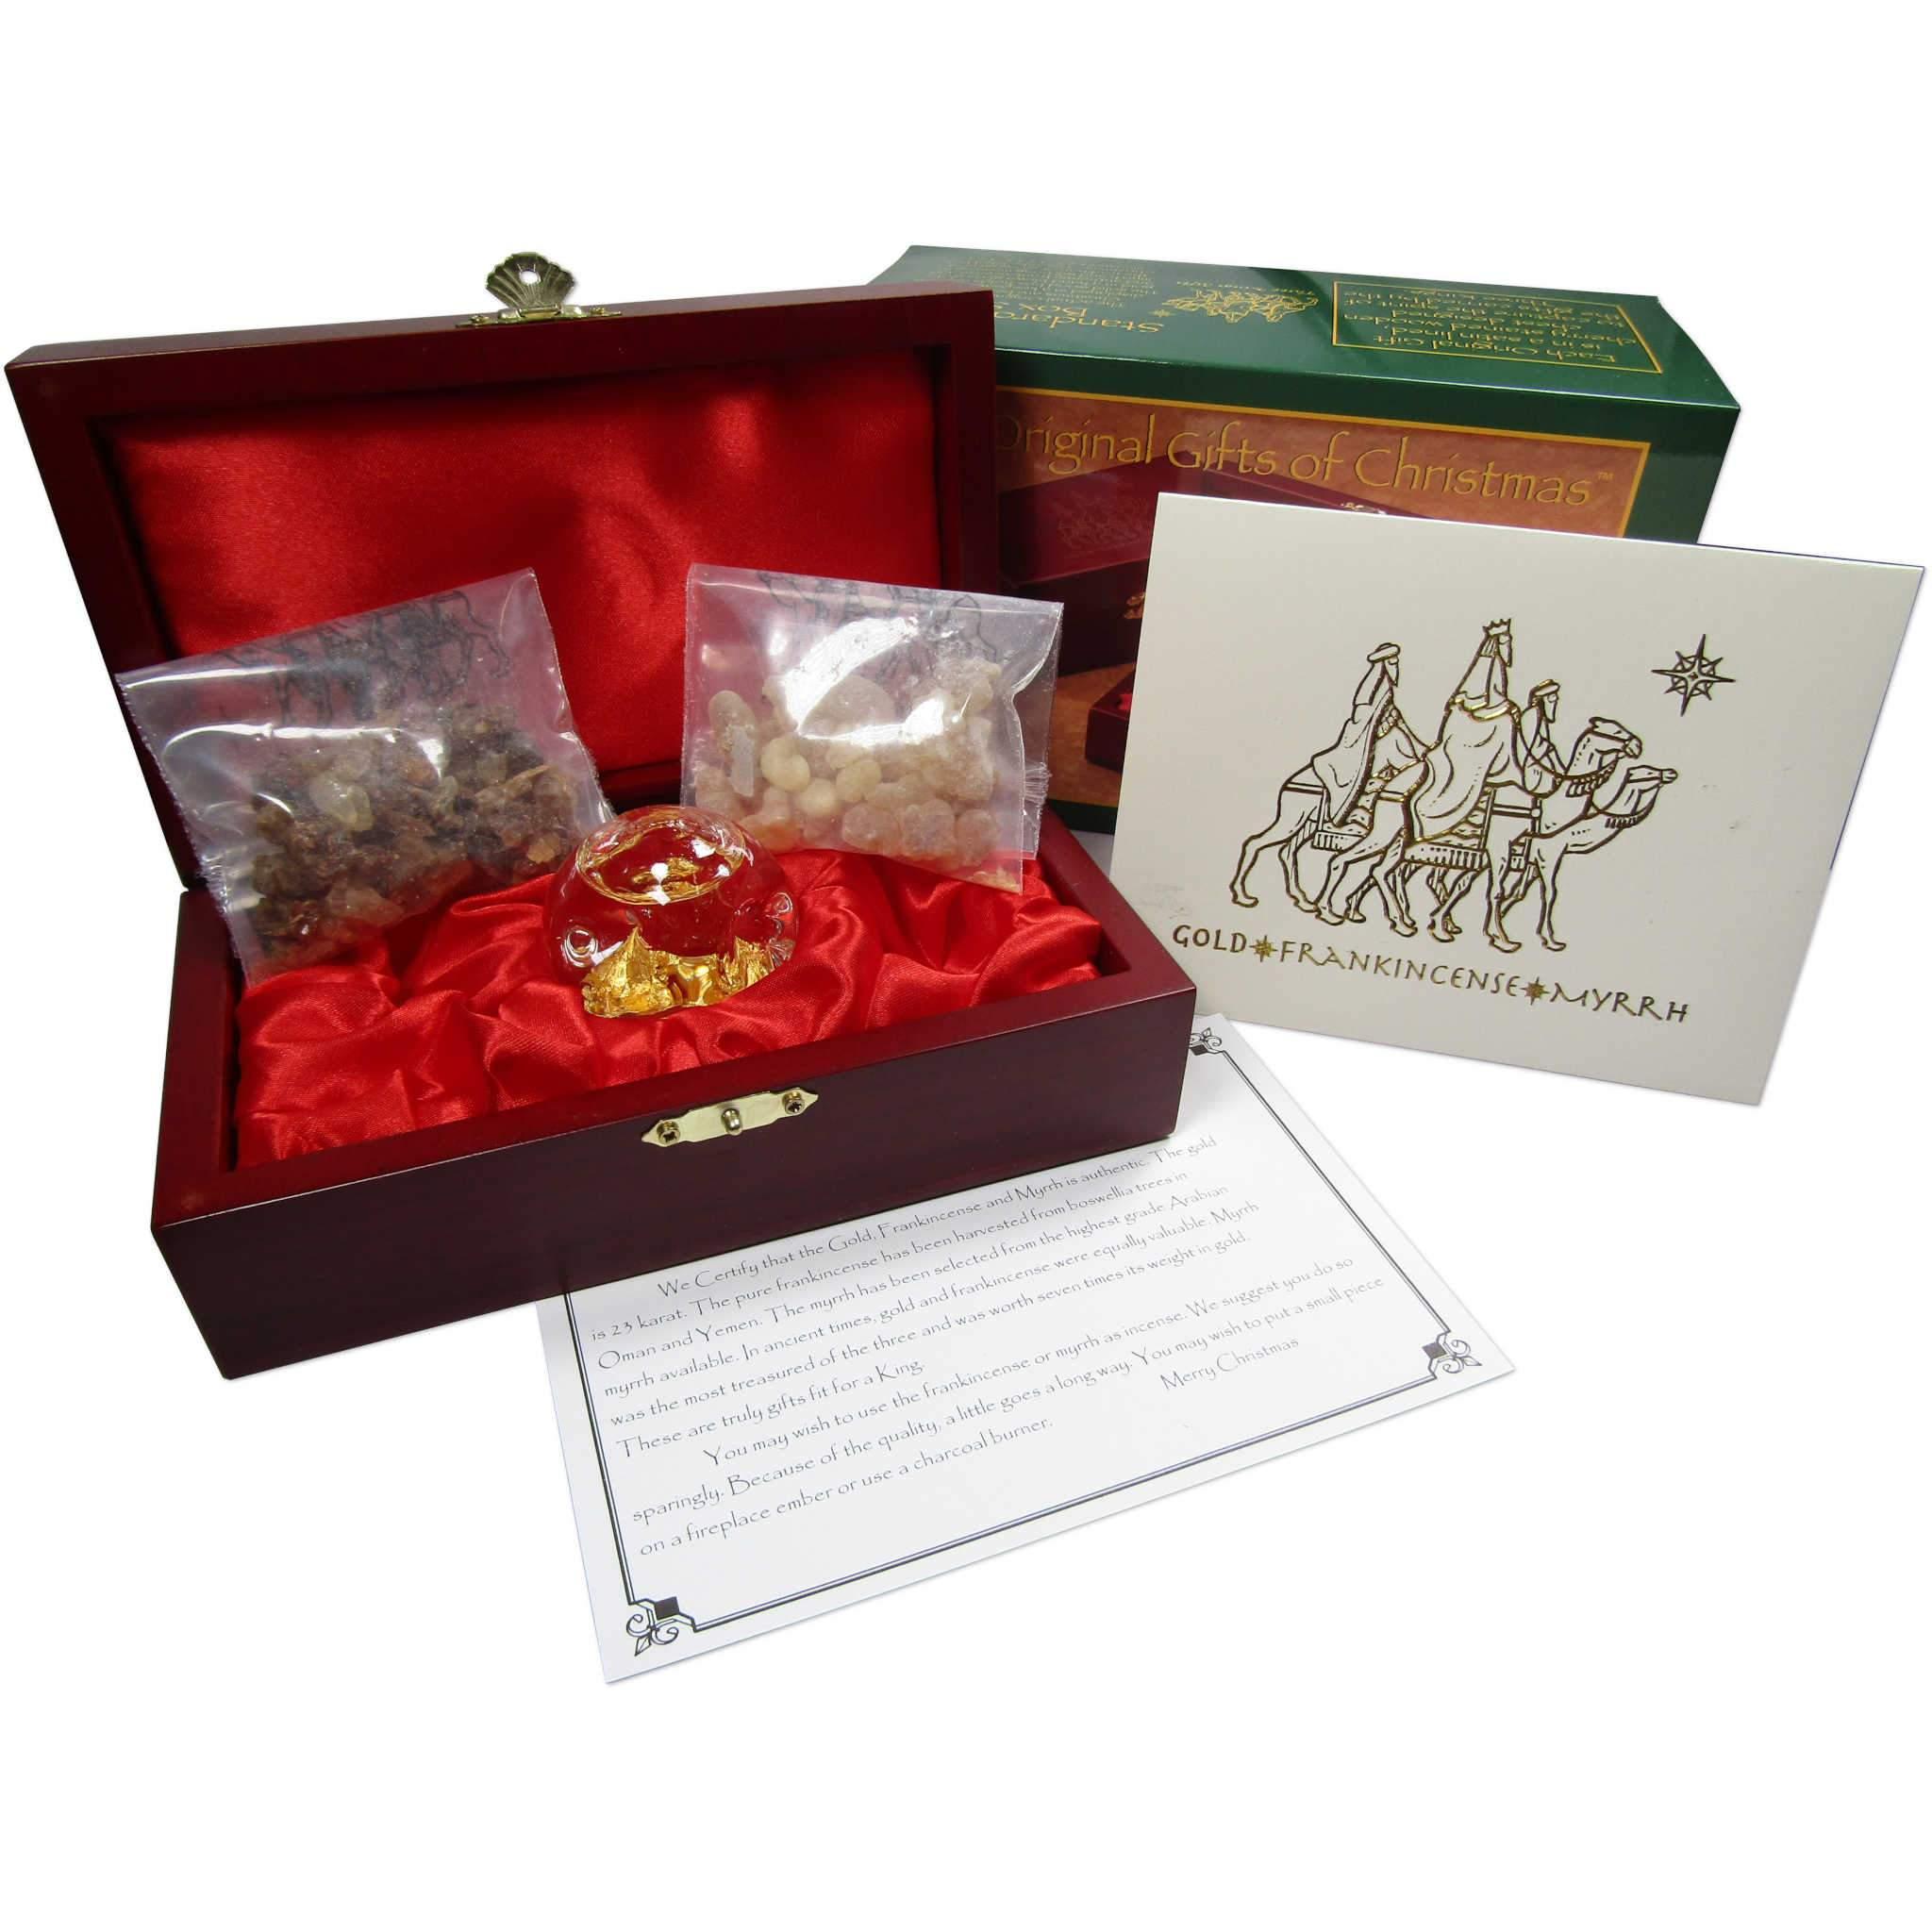 No. 007 The King's Gift candle - Frankincense & Myrrh